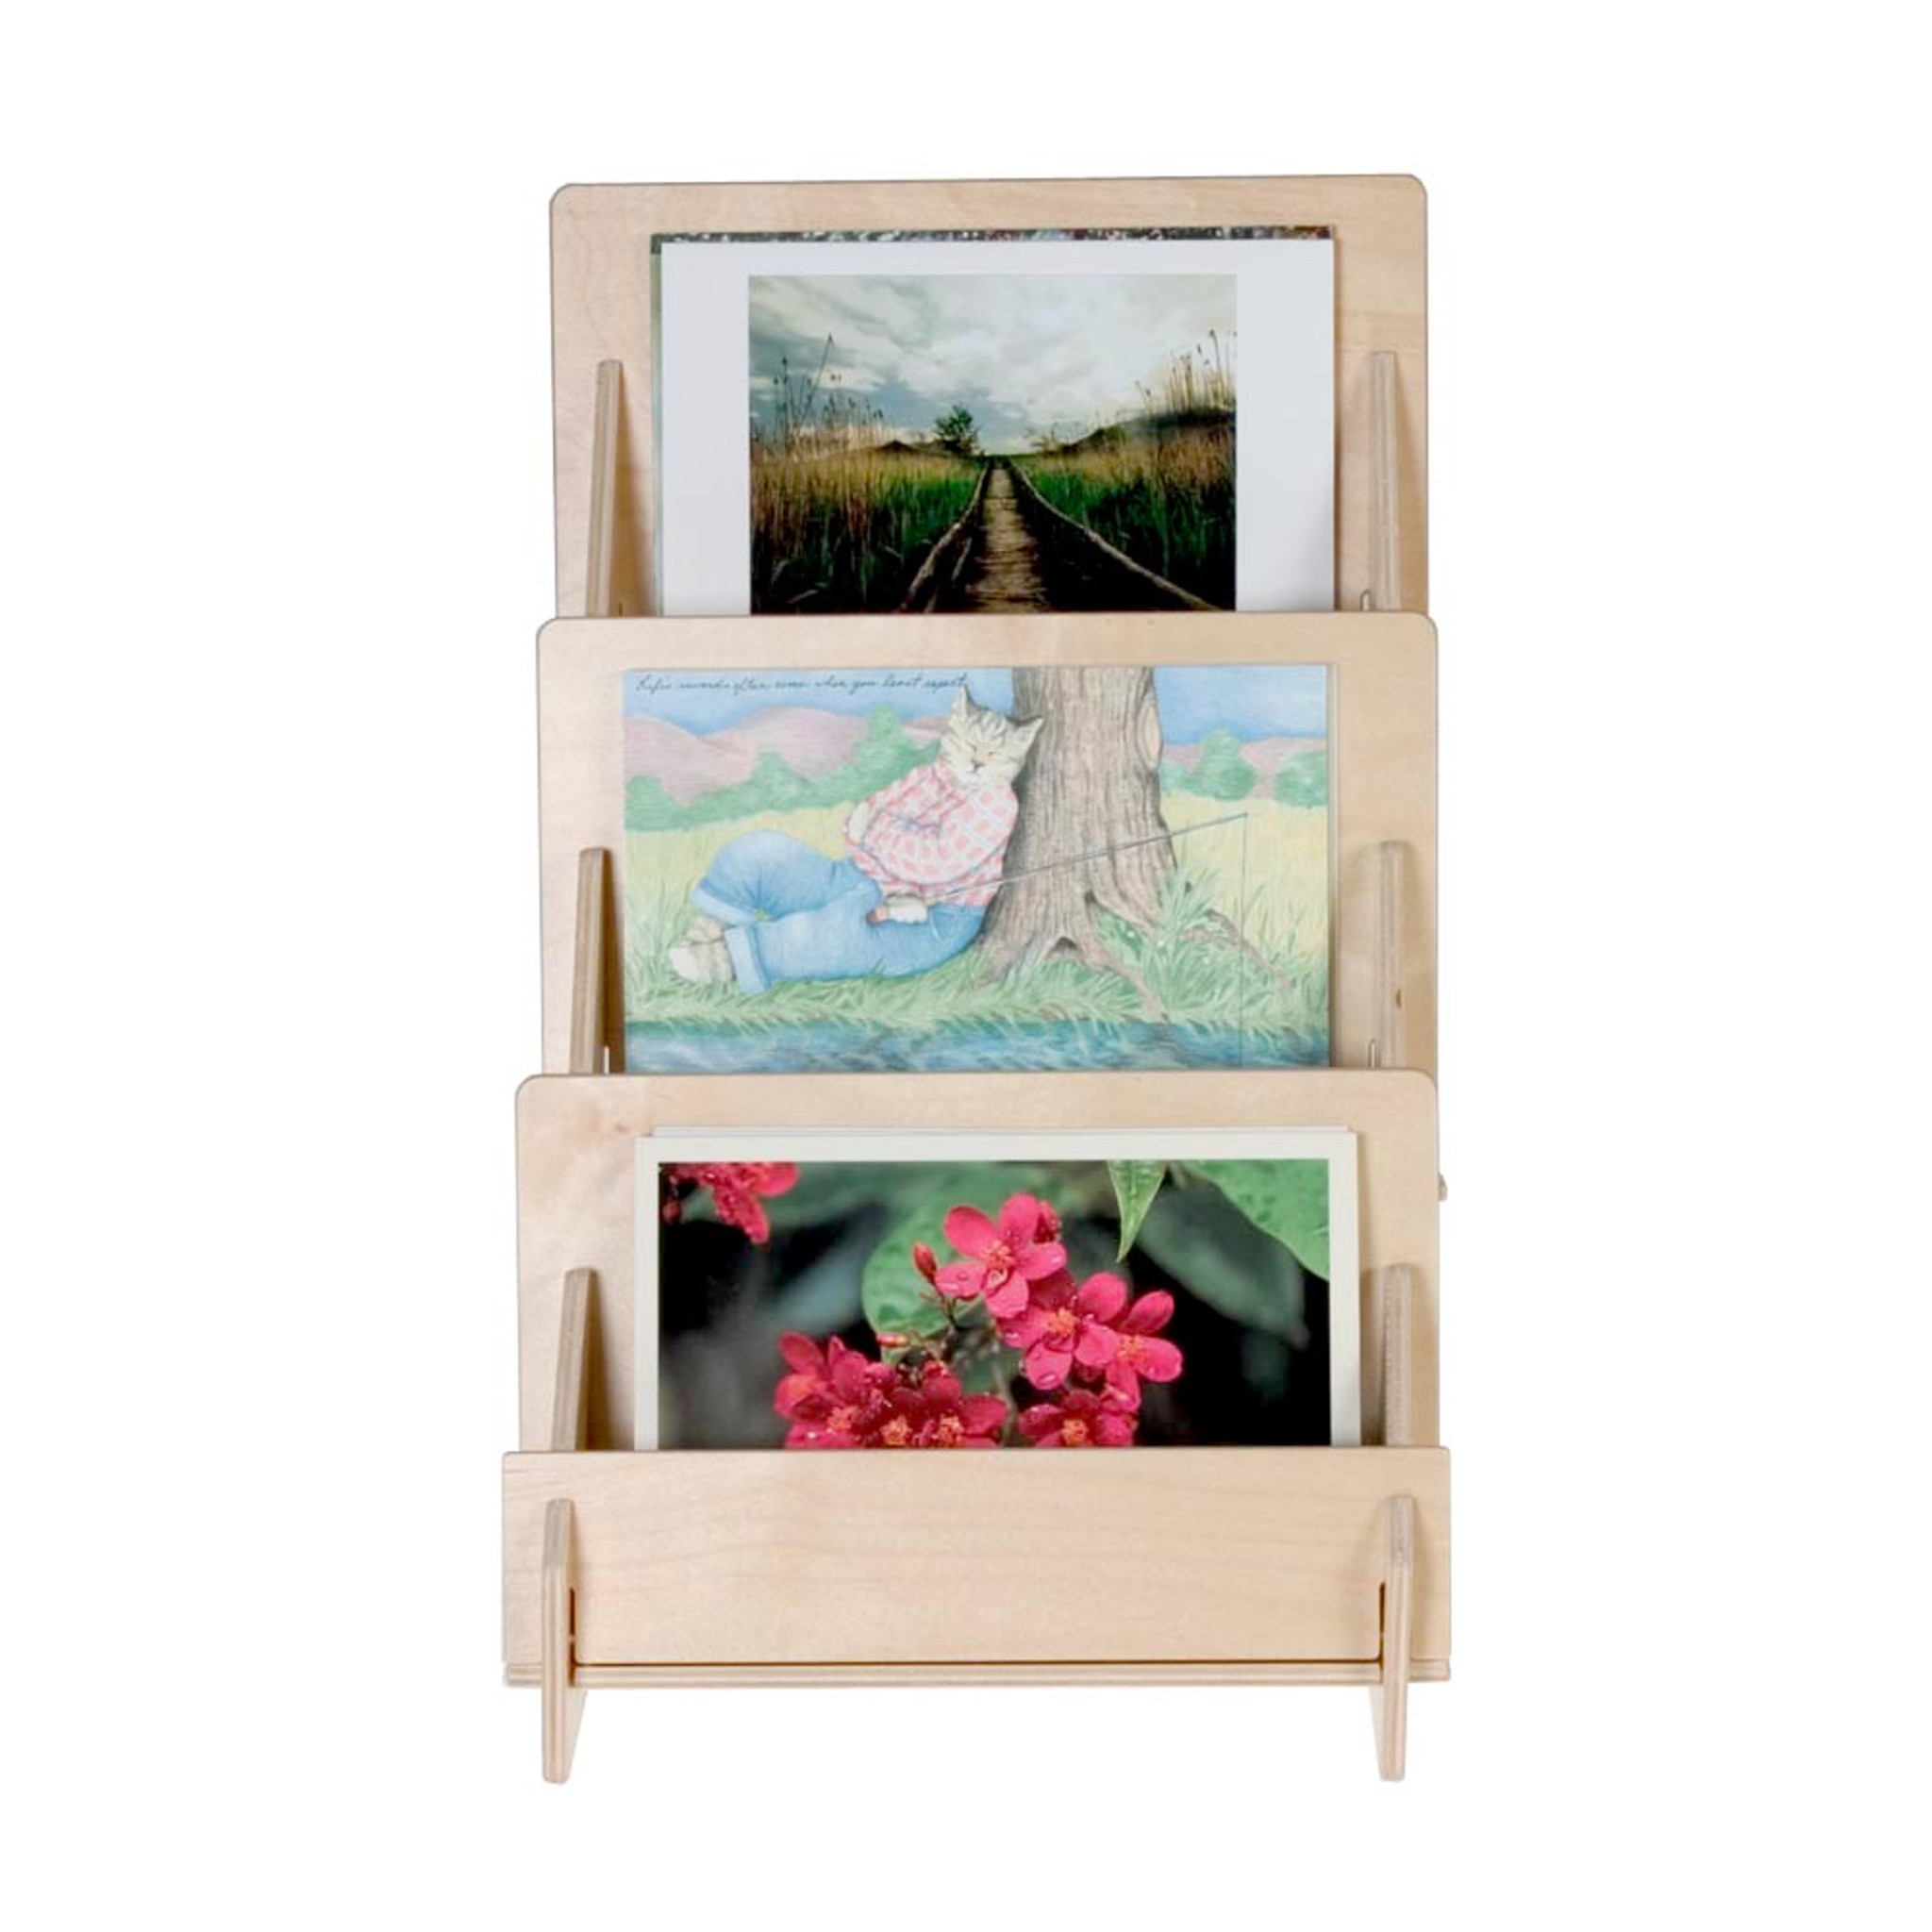  AnairsMo 3 Tier Greeting Card Display Stand, Wooden